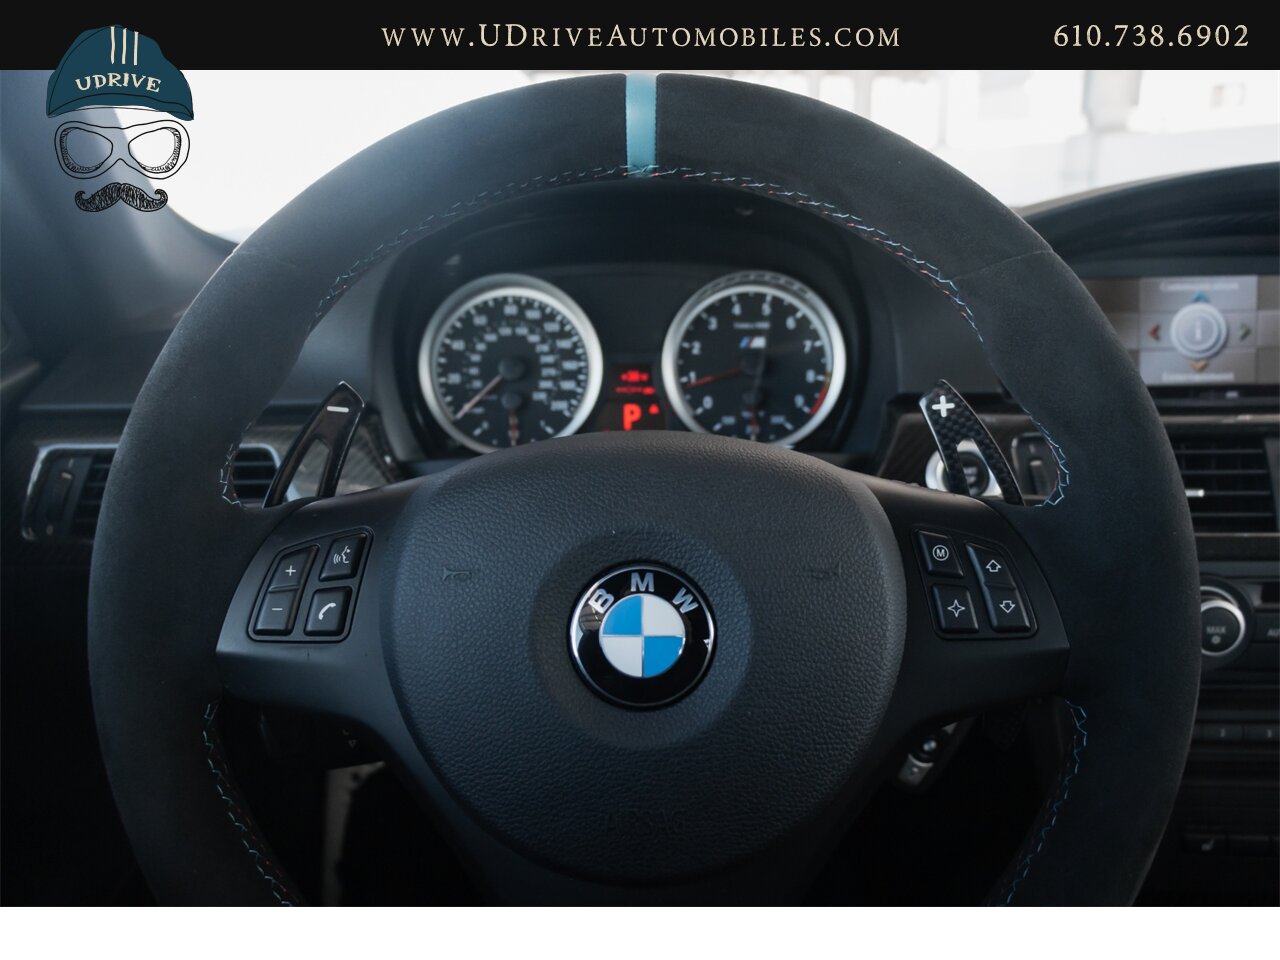 2008 BMW M3 Dinan S3-R M3 1 of 36 Produced DCT  1 Owner Full Service History 4.6L Stroker V8 - Photo 31 - West Chester, PA 19382